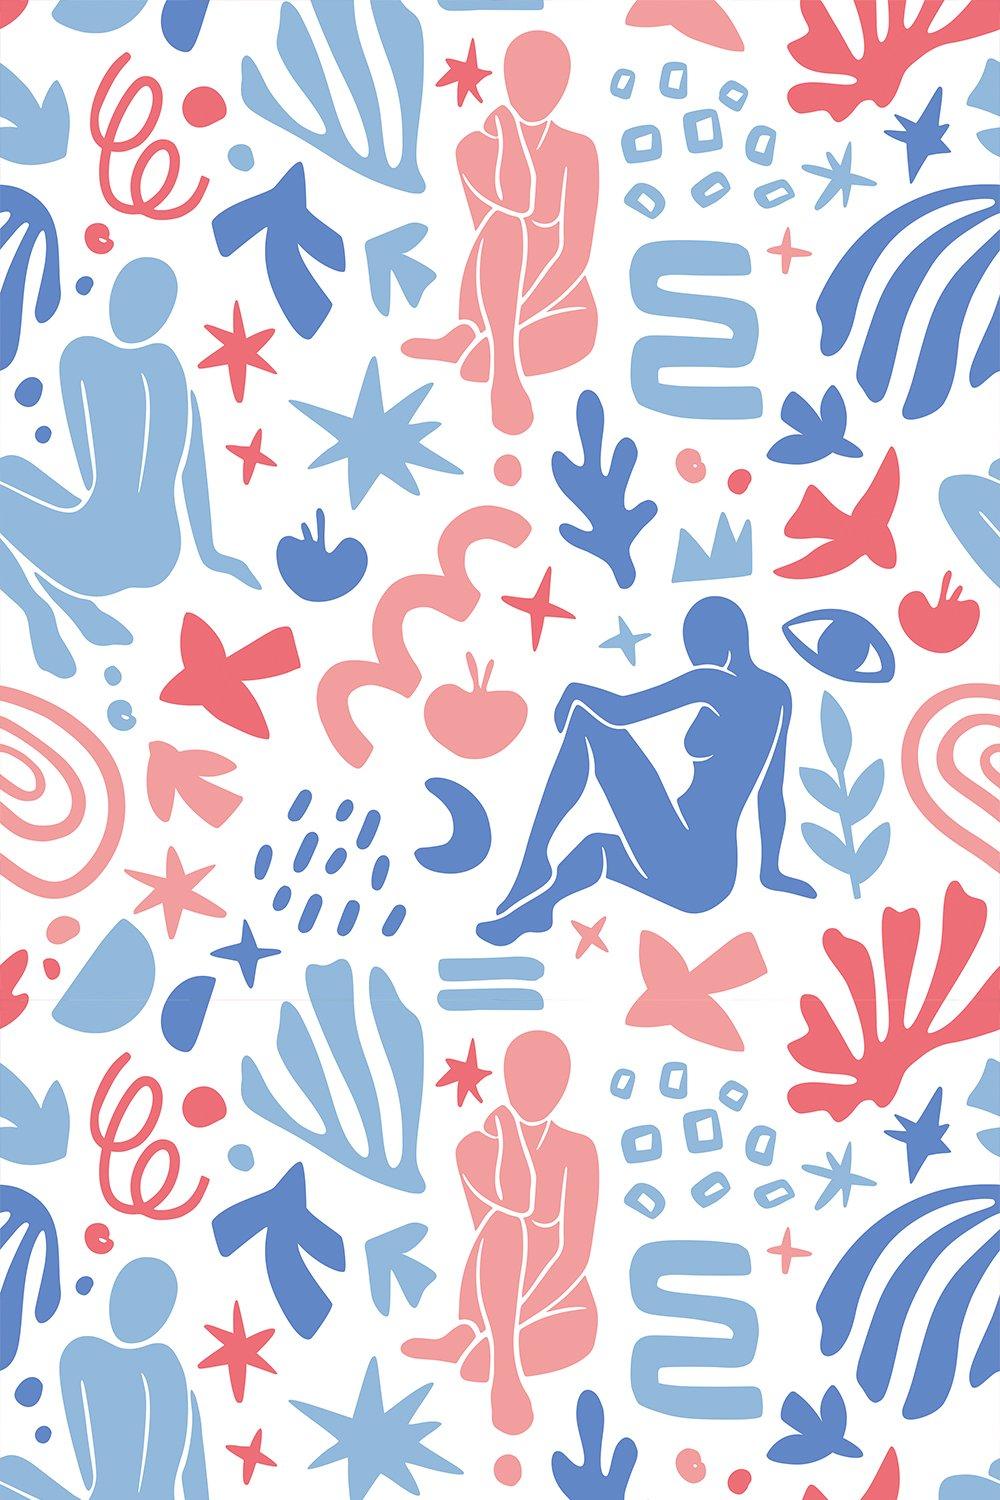 Eco-Friendly Matisse Style People Wallpaper